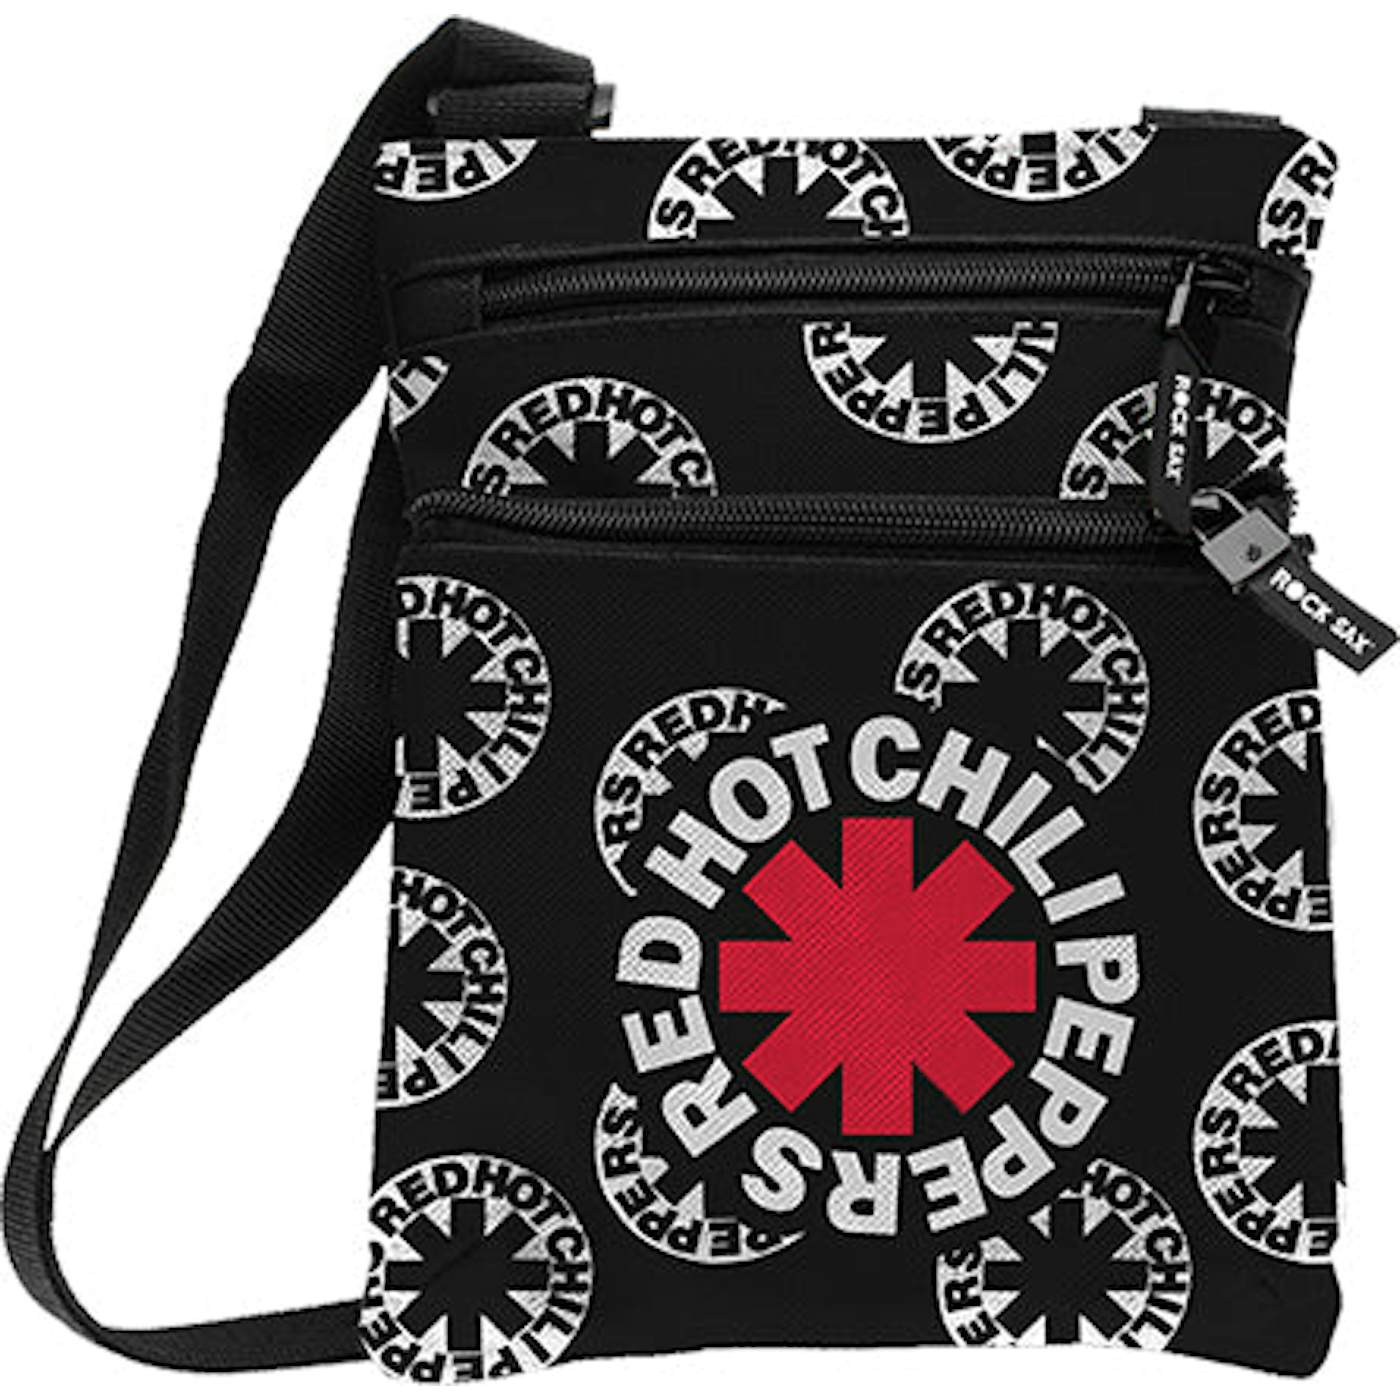 Rocksax Red Hot Chili Peppers Body Bag - Asterix All Over Print